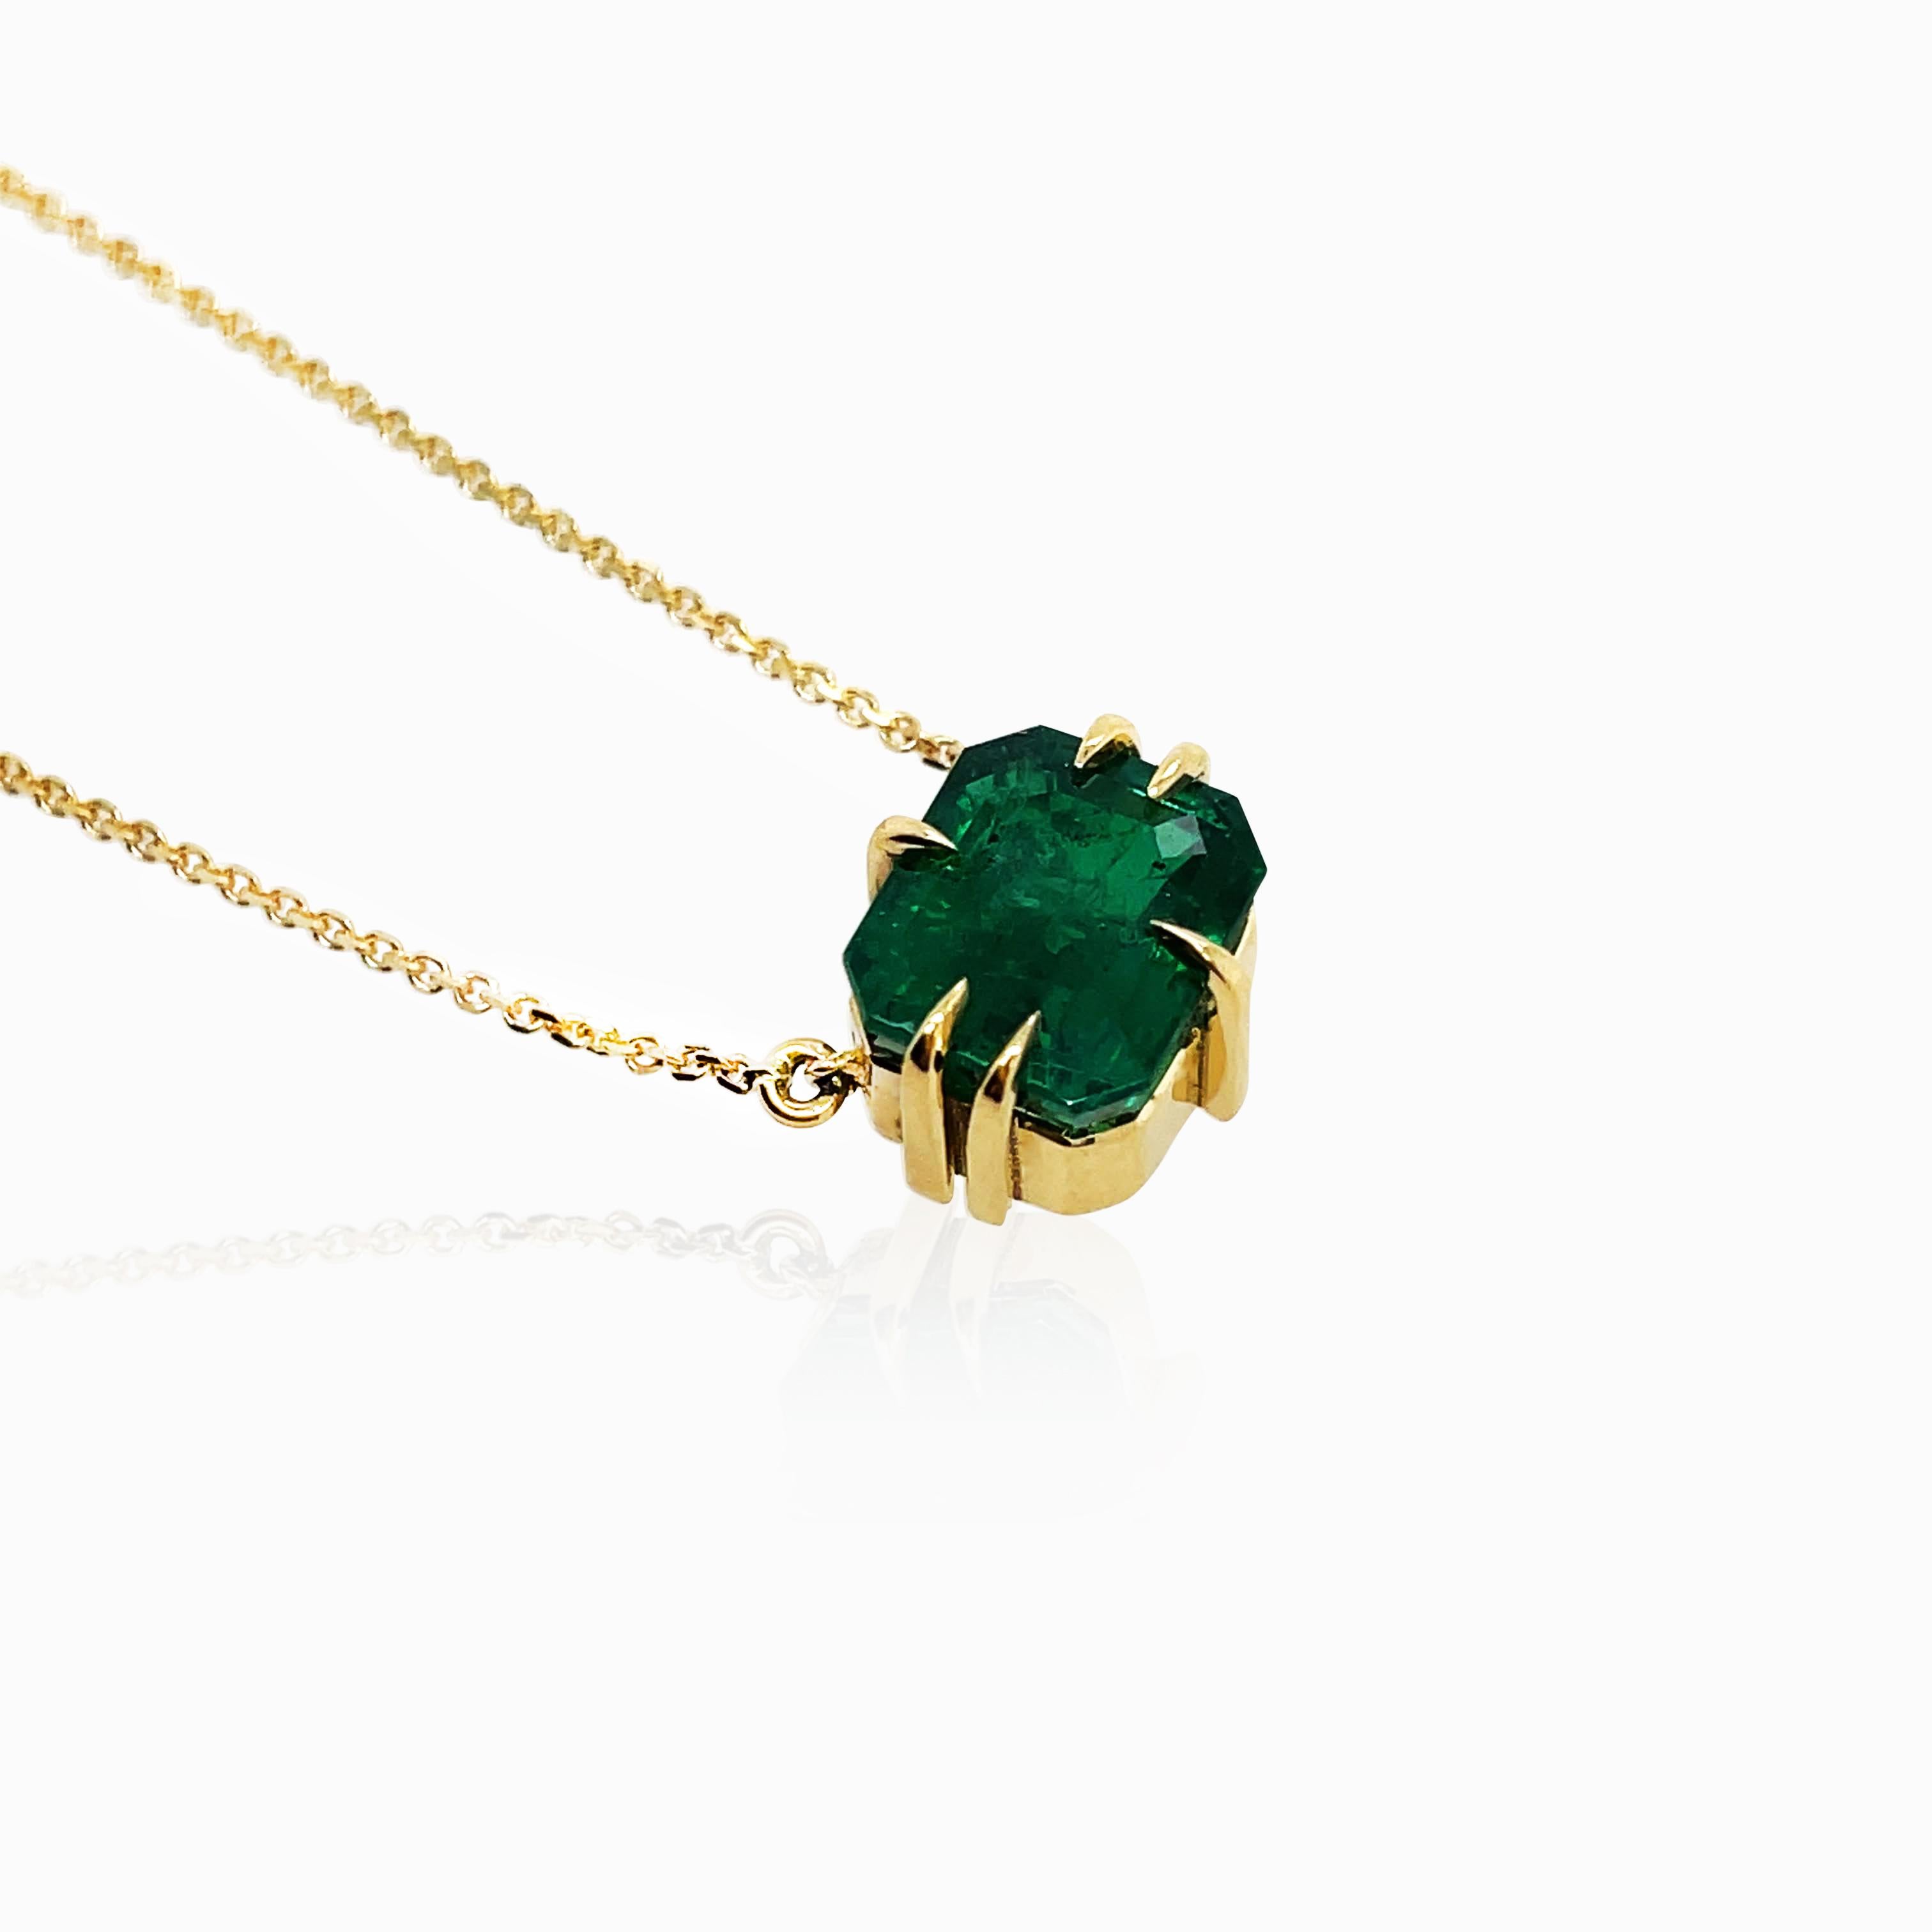 2.26ct Emerald necklace made in 18k yellow gold with chain  9